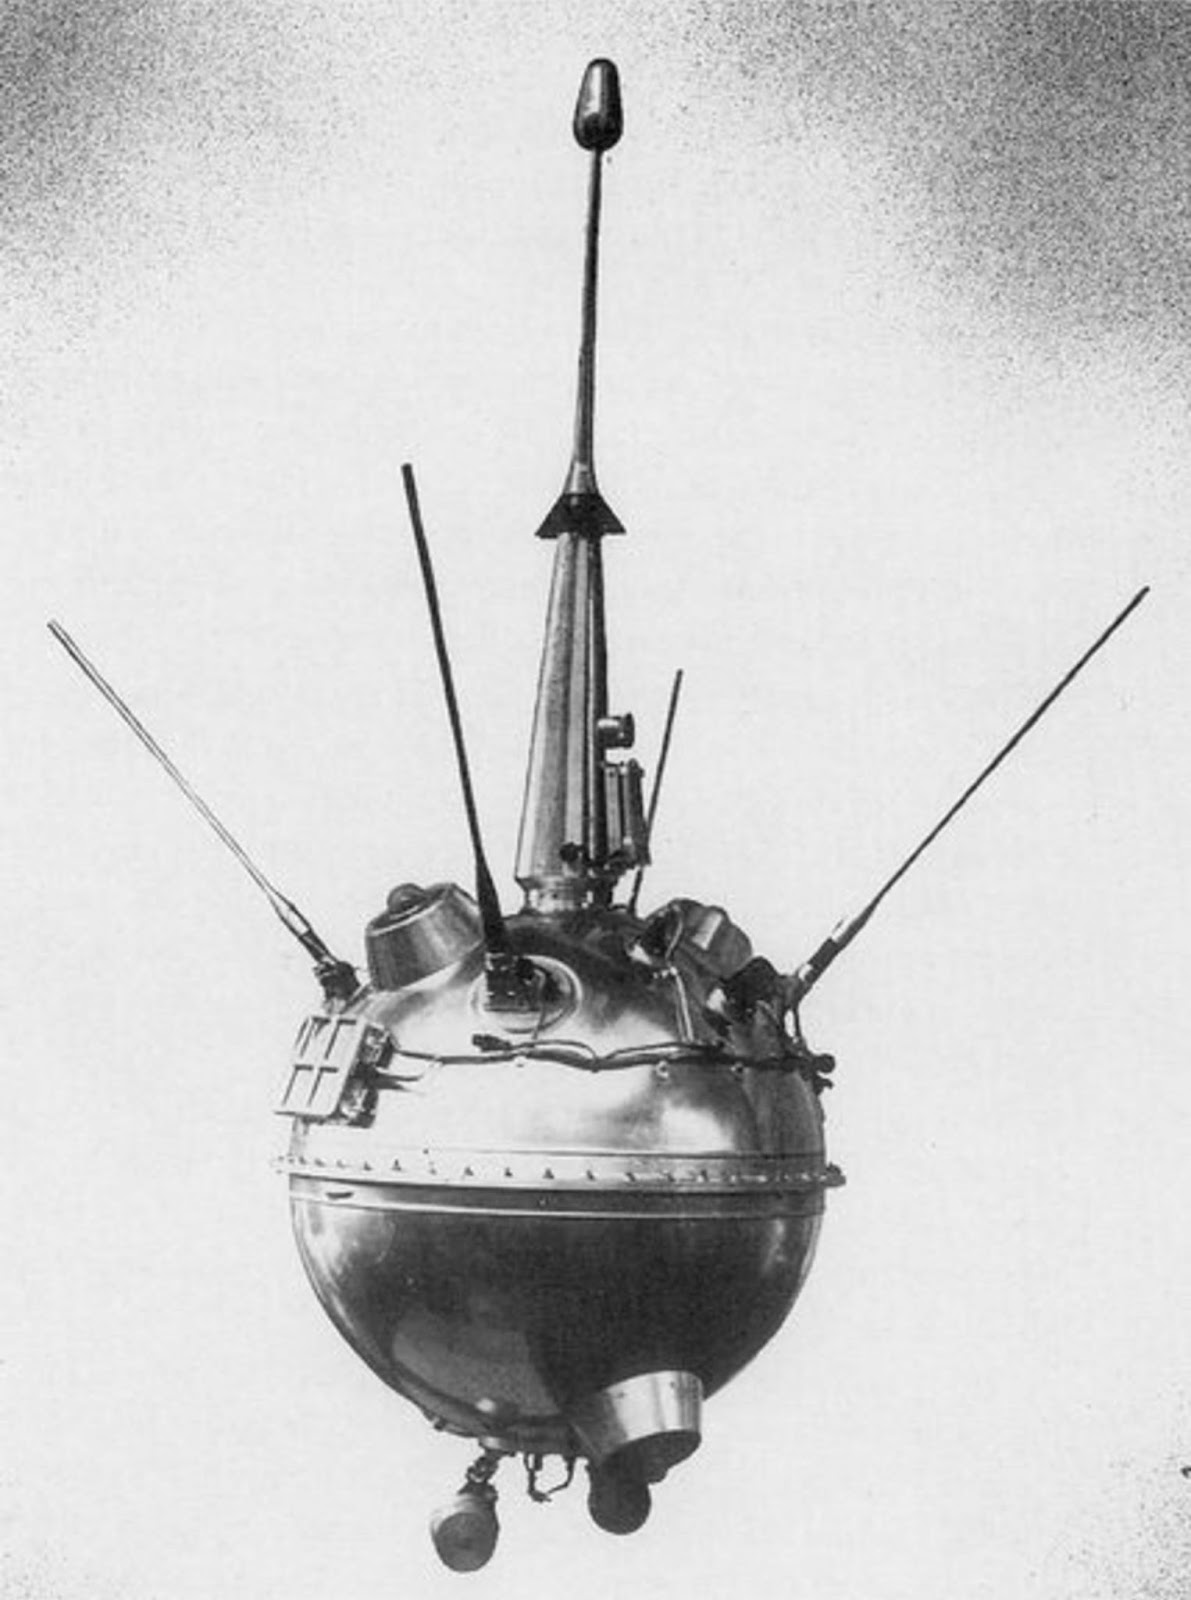 Black and white photo a sphere-like spacecraft with several rods sticking out of it